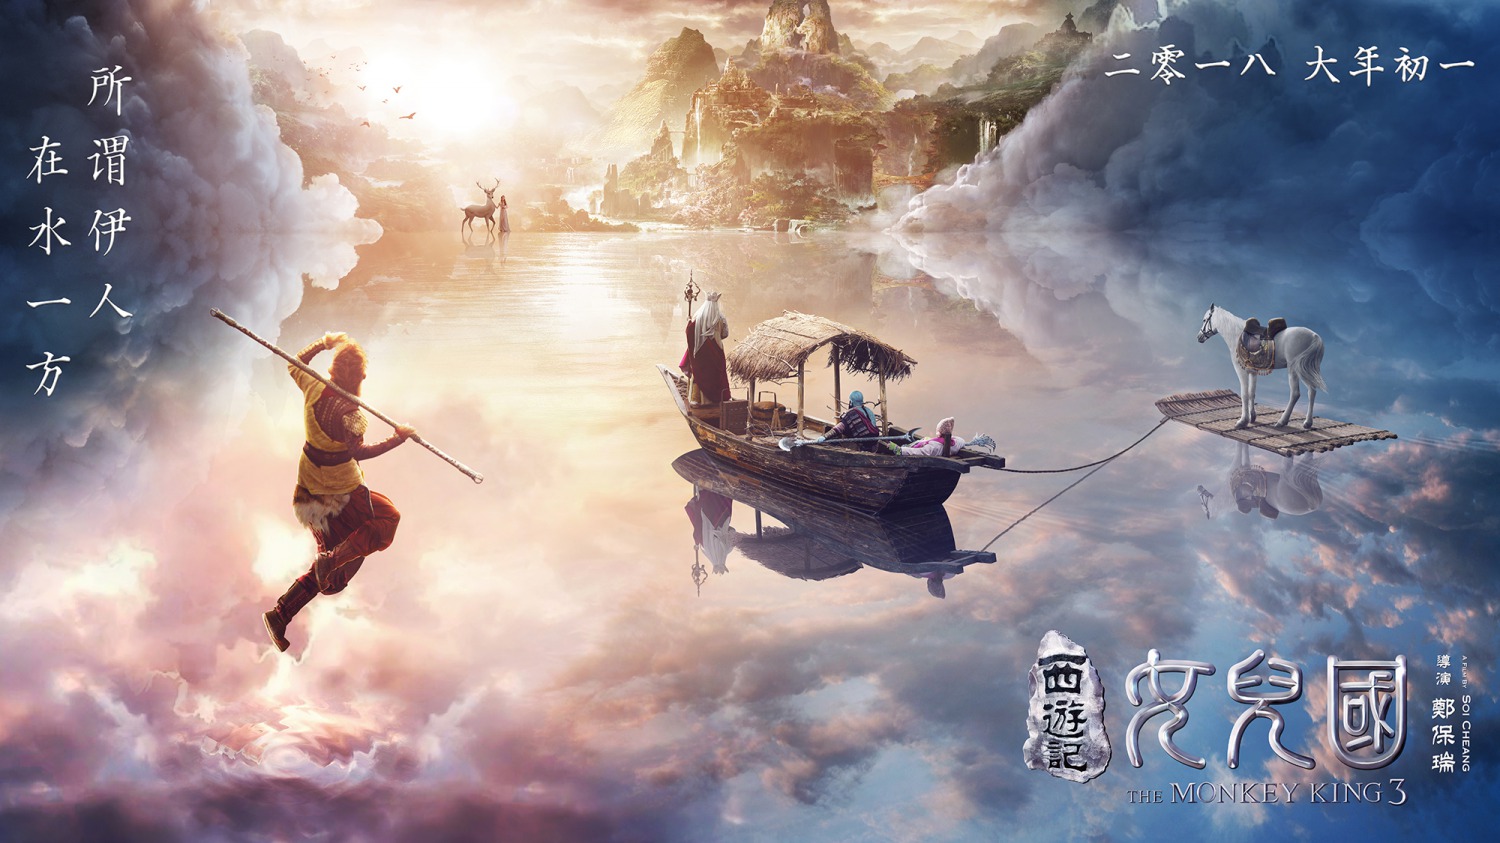 Extra Large Movie Poster Image for The Monkey King 3 (#1 of 2)